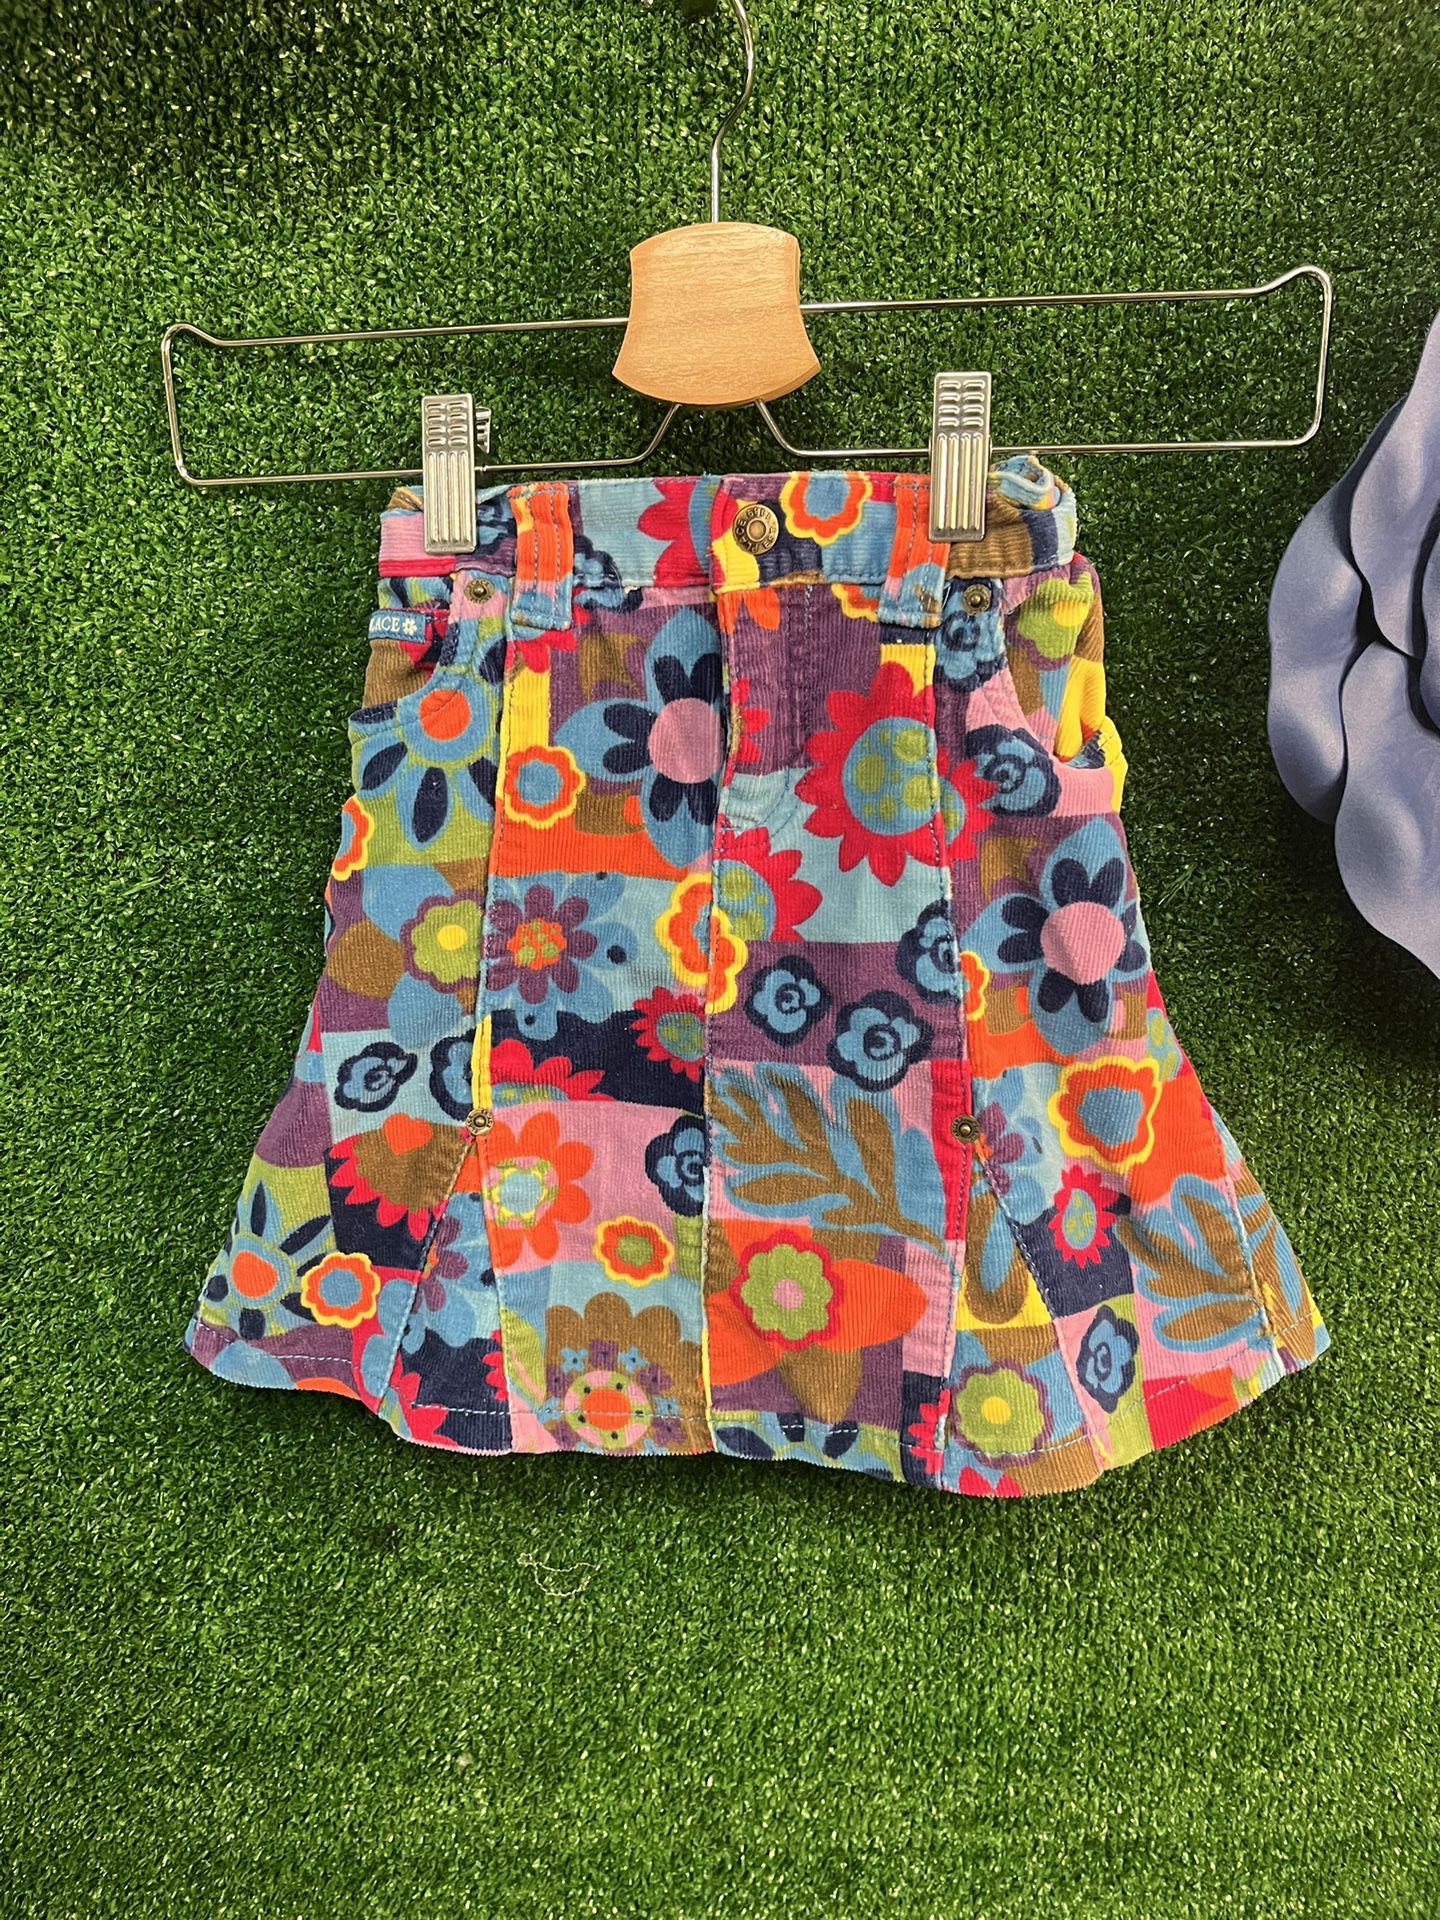 The Children’s Place Colorful Floral Skirt Size 4 Toddler